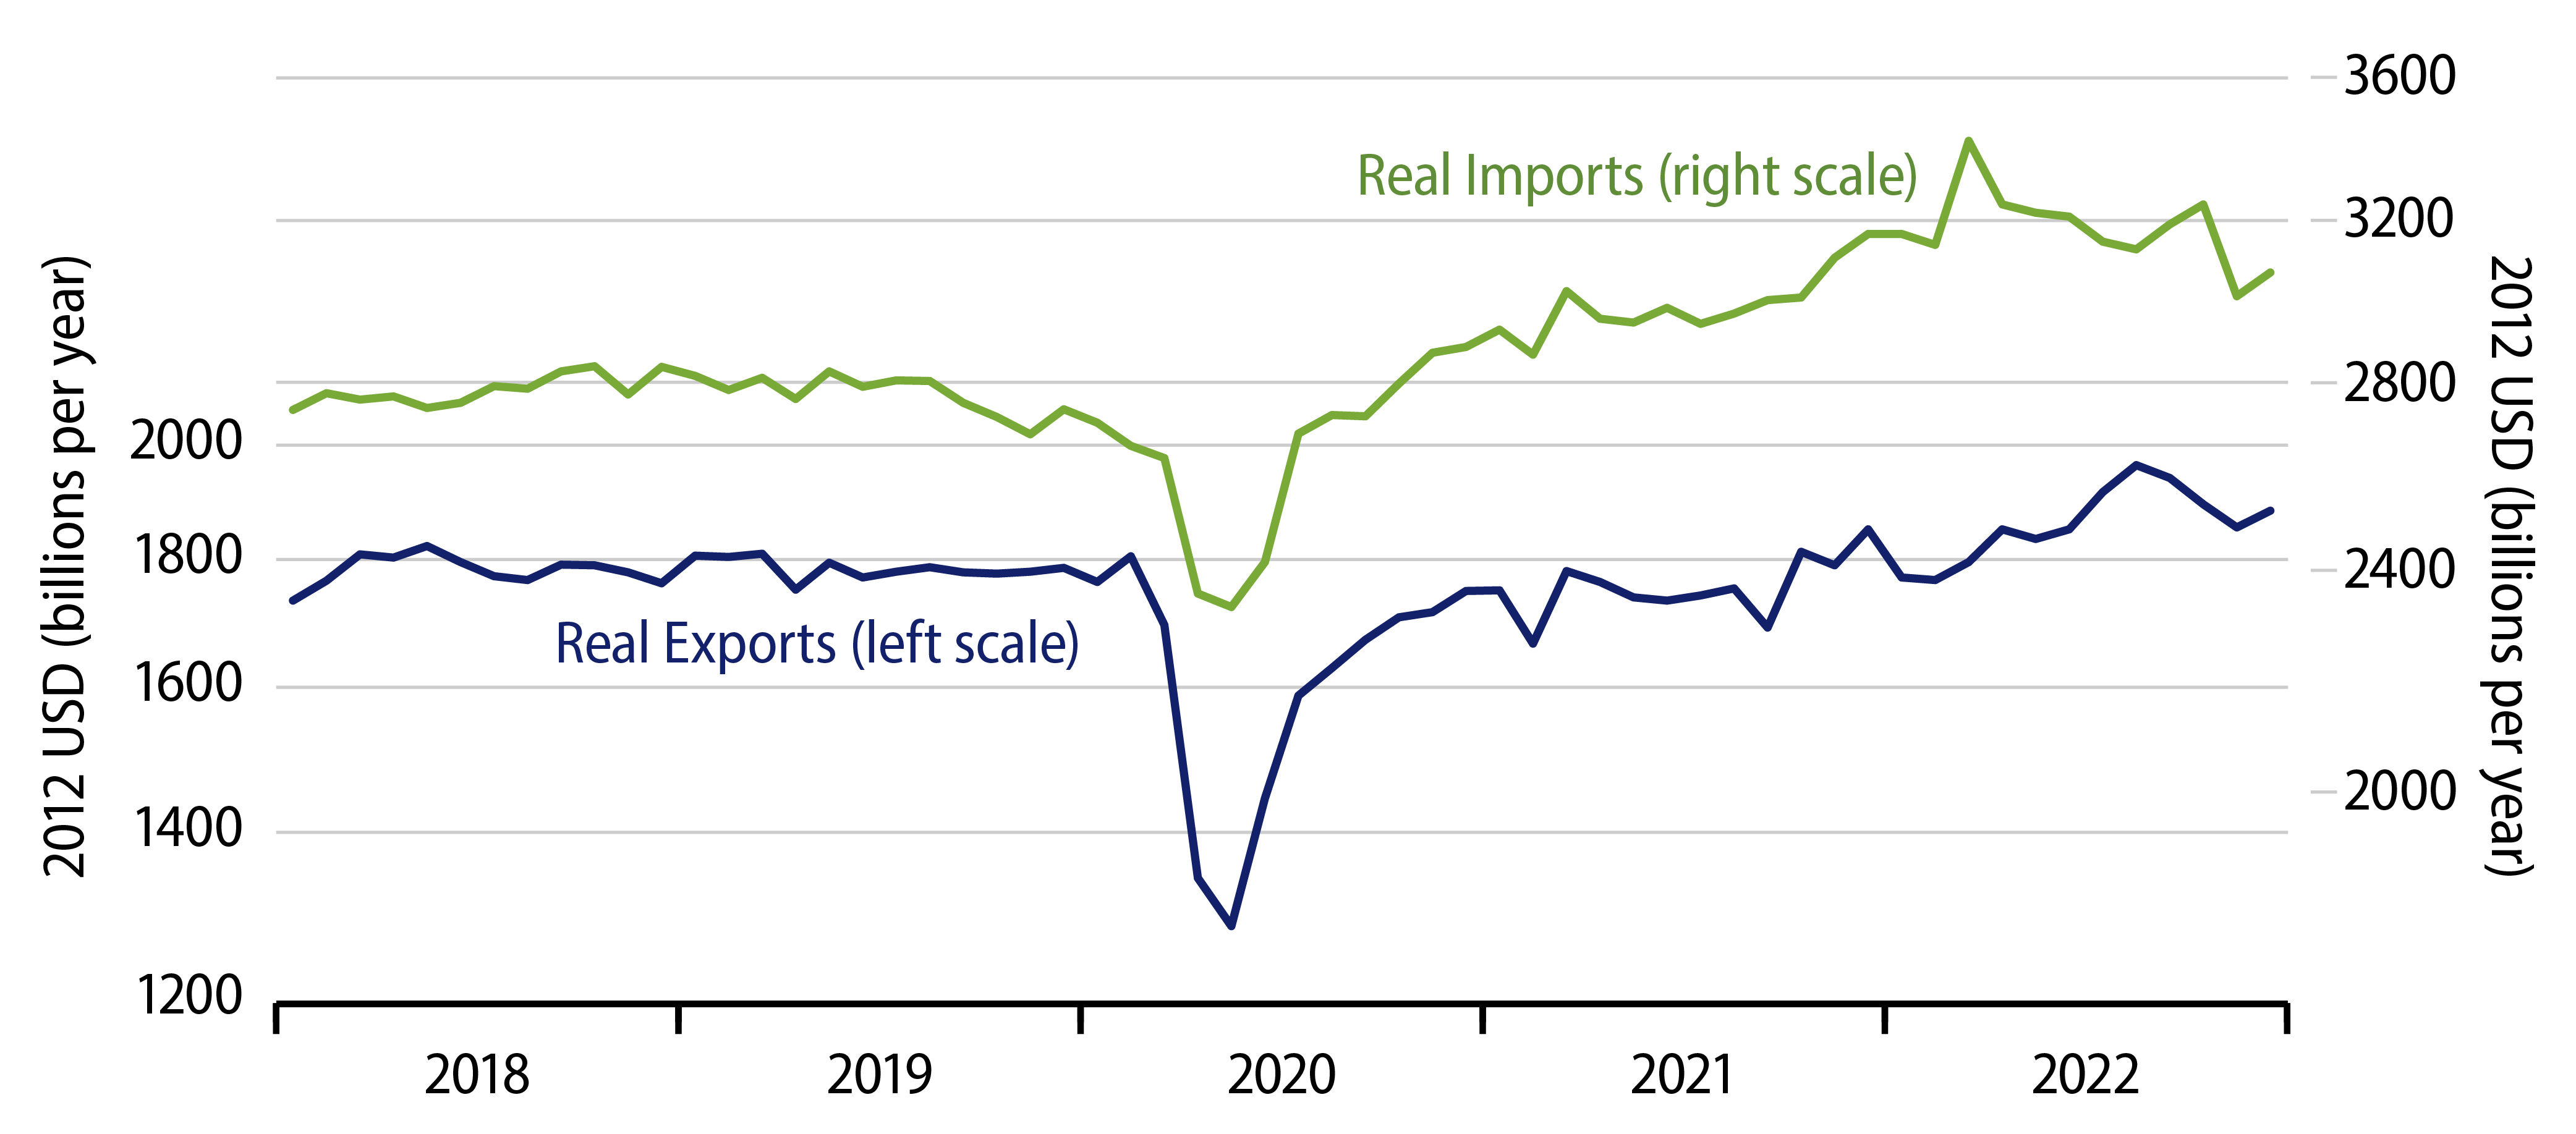 Explore Real Imports and Exports of Goods